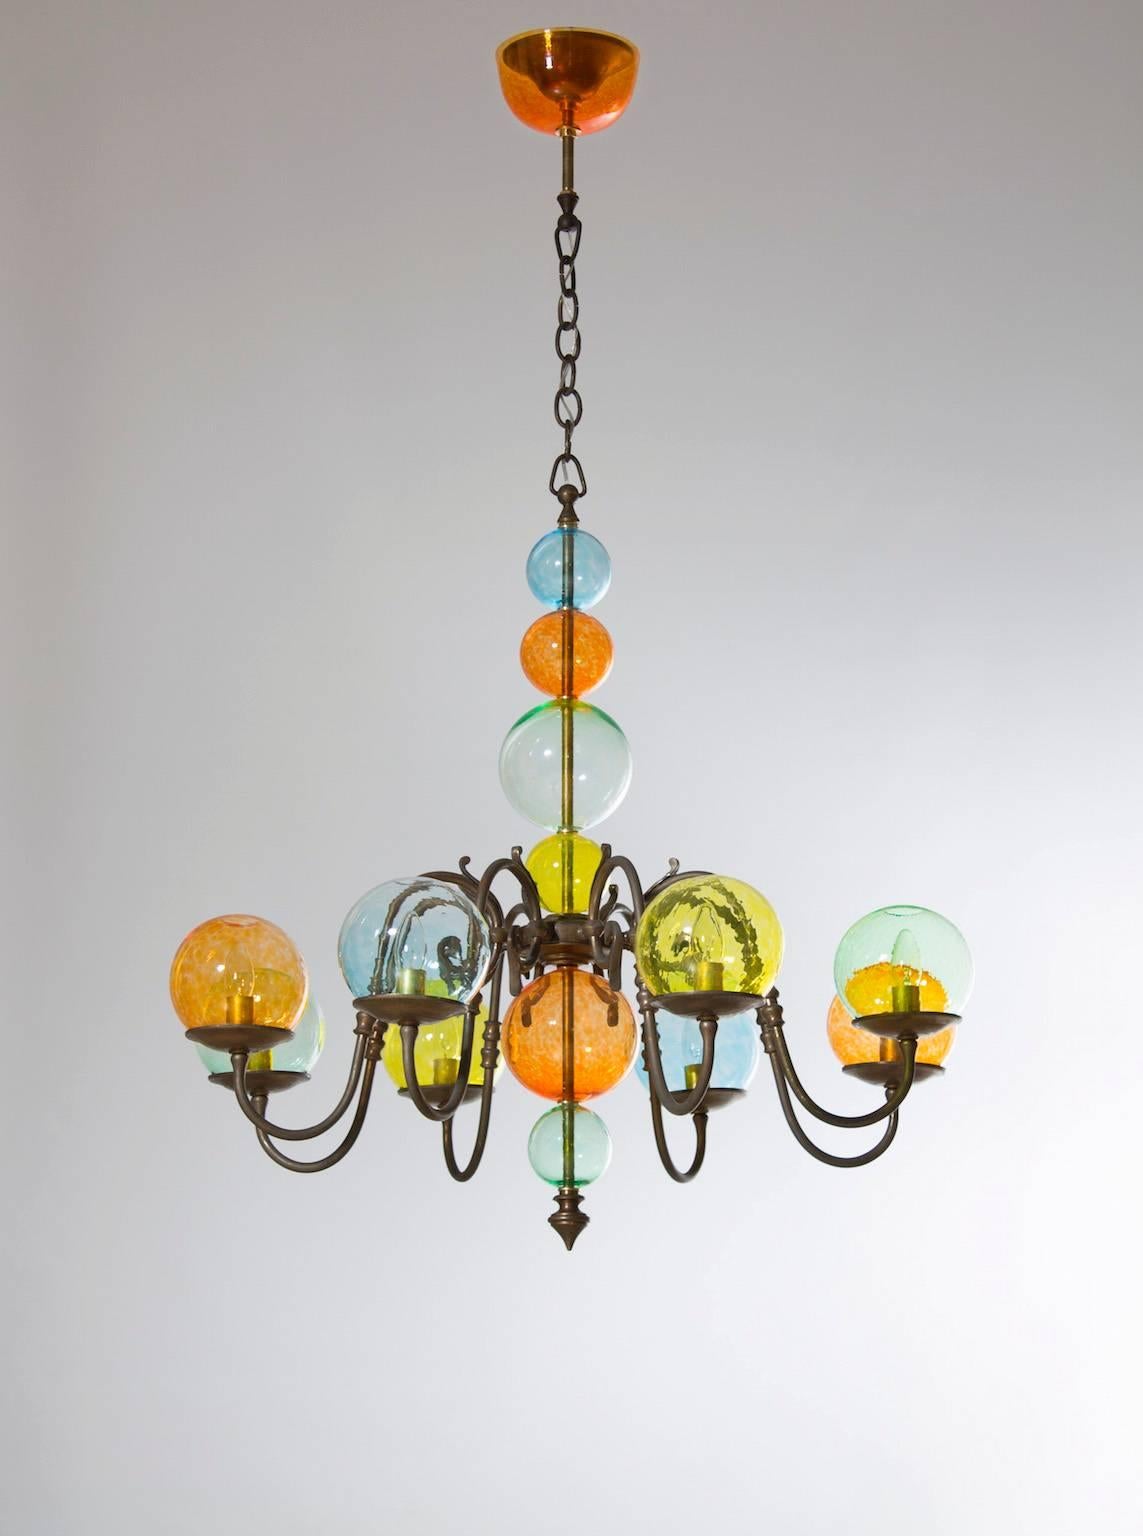 Special Italian Venetian, Chandelier, brass & colored blown Murano Glass bolls, 1960s,  in excellent original condition circa from 1960s, composed from a fantastic brass frame and from glass spheres in yellow, orange, green, and light-blue. The